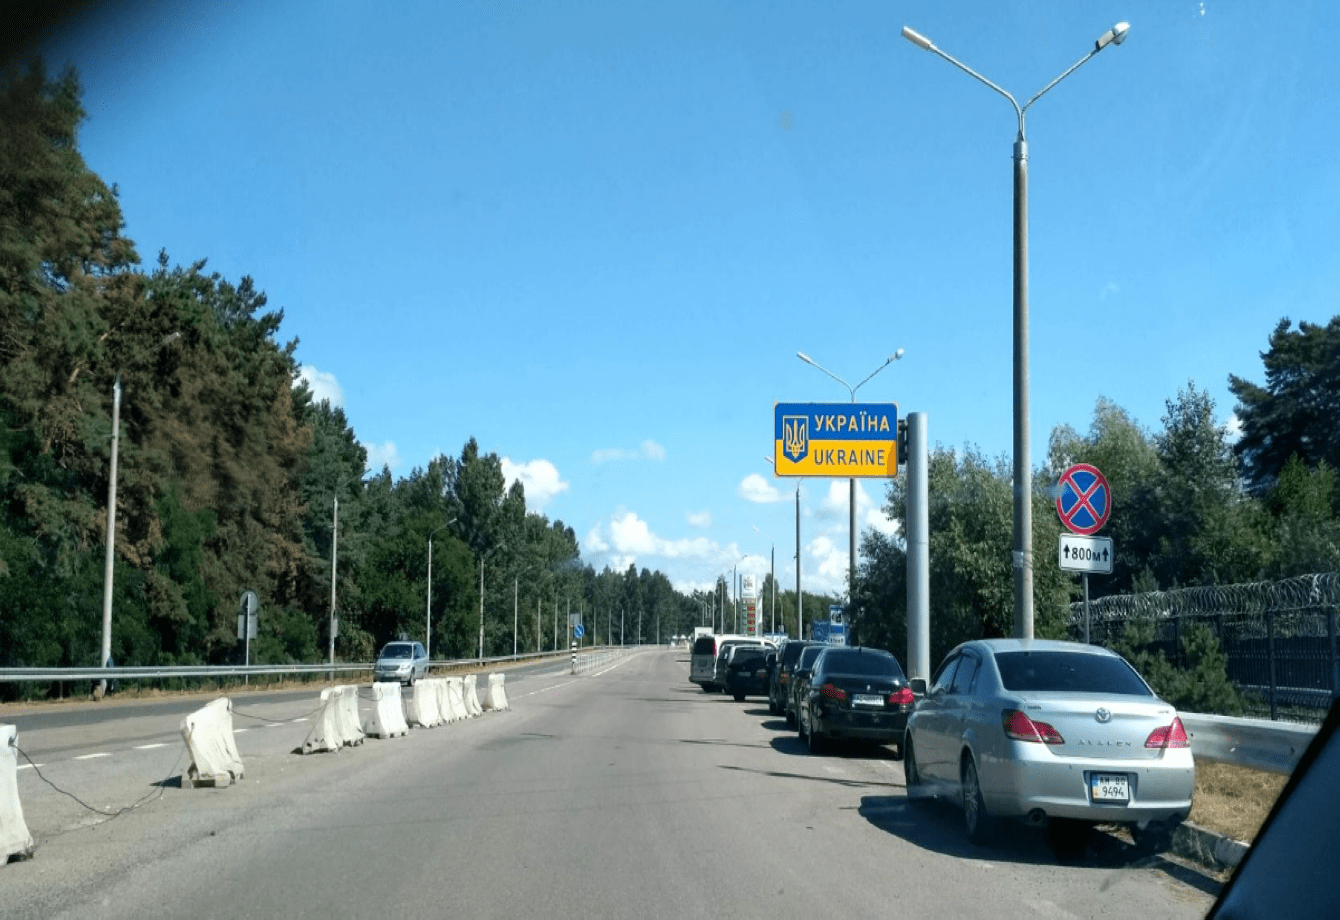 Ukrainian driving vocabulary and phrases